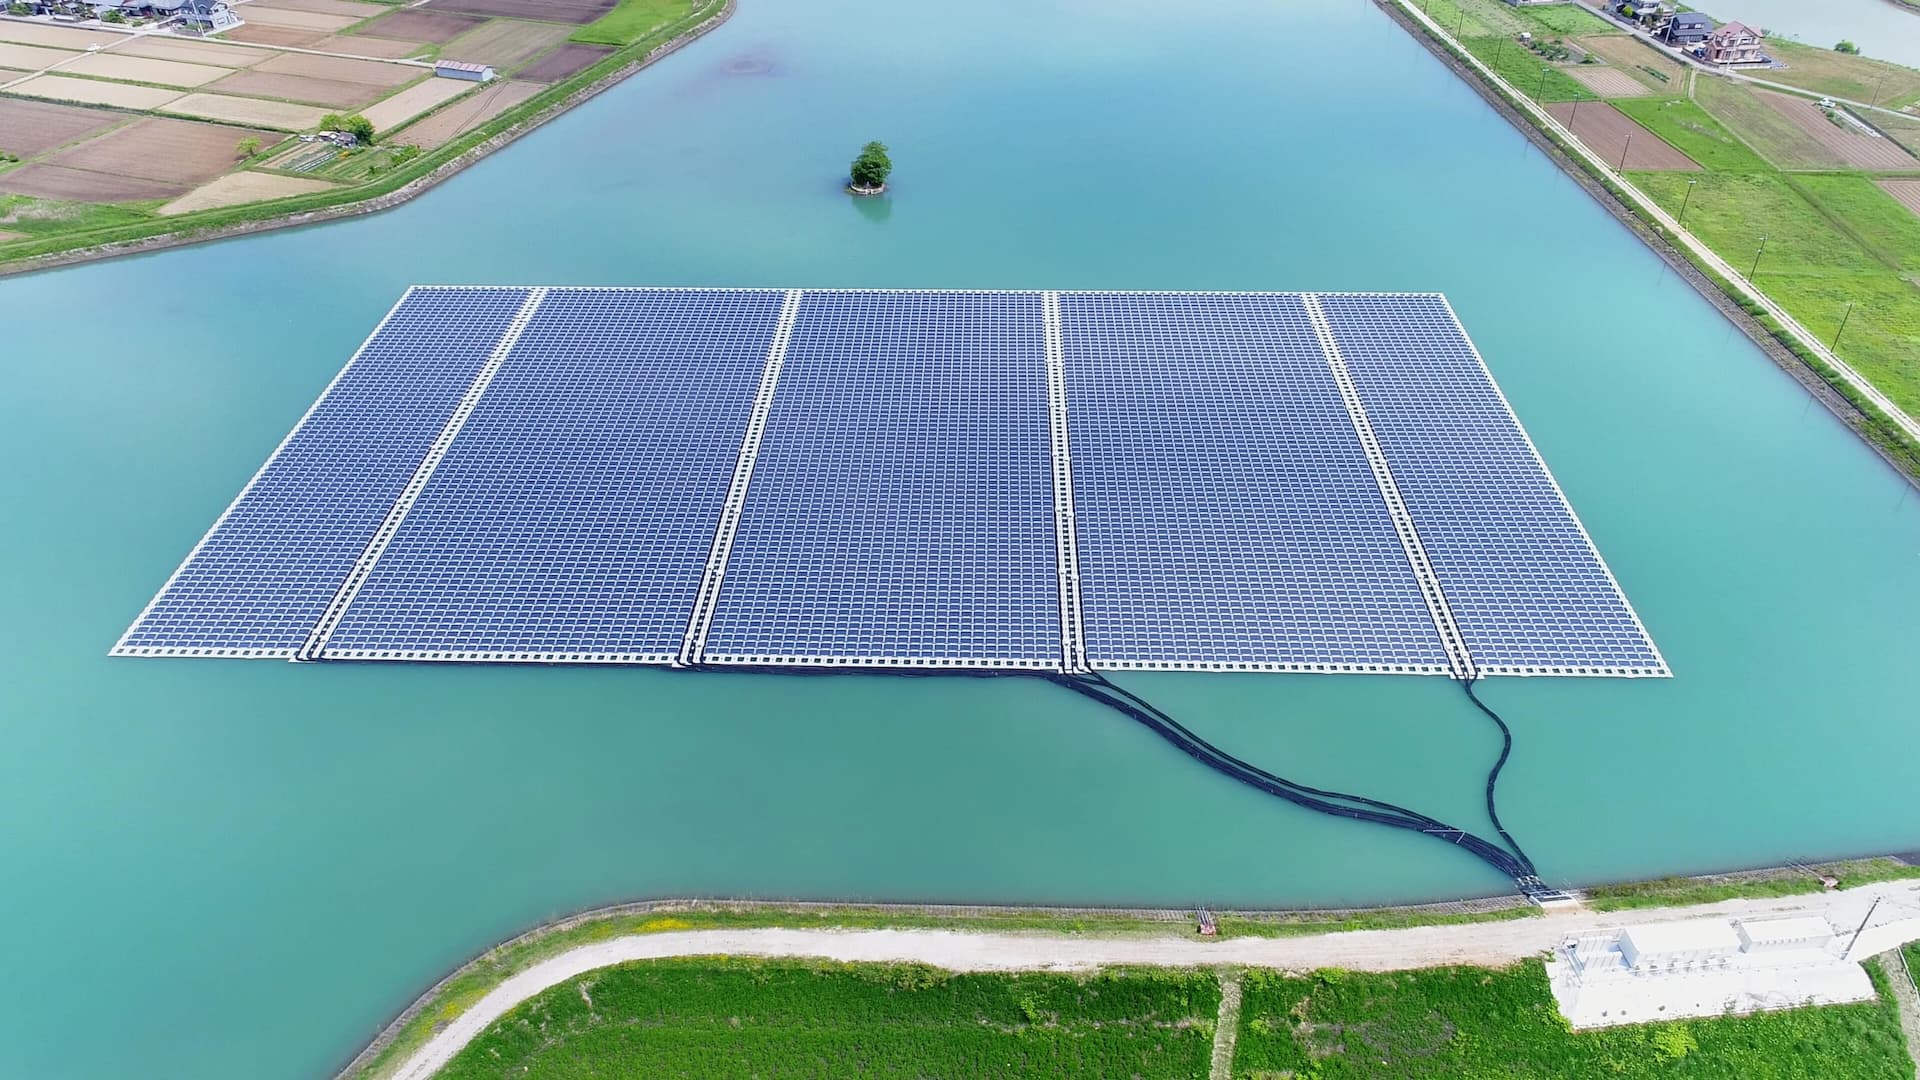 Thousands of cities could be powered entirely by floating solar panels